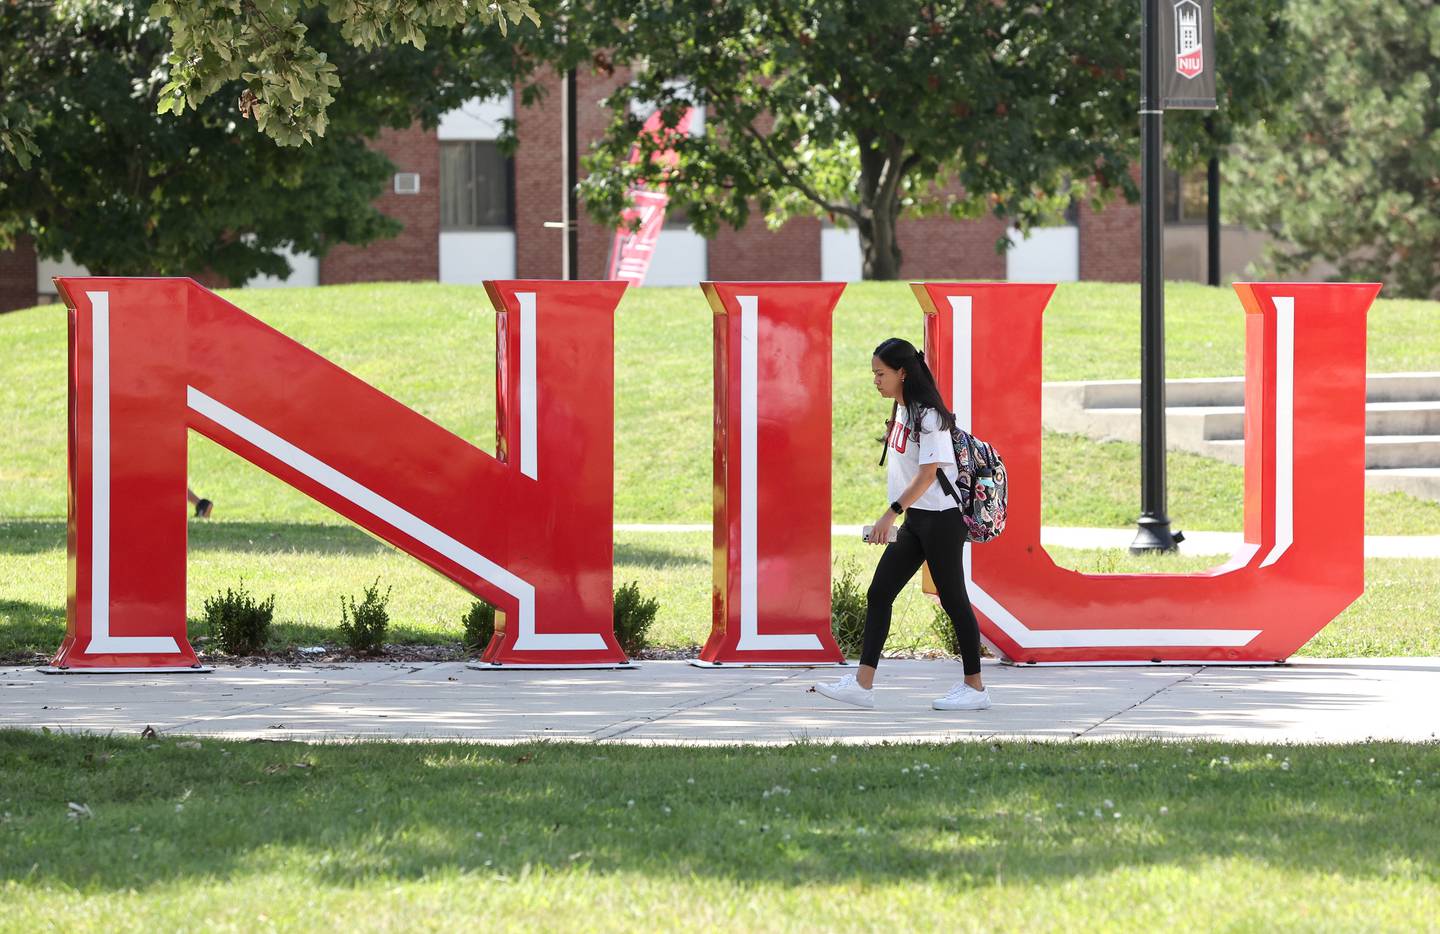 Northern Illinois University students move between classes Wednesday, Aug. 24, 2022, on campus at NIU in DeKalb.